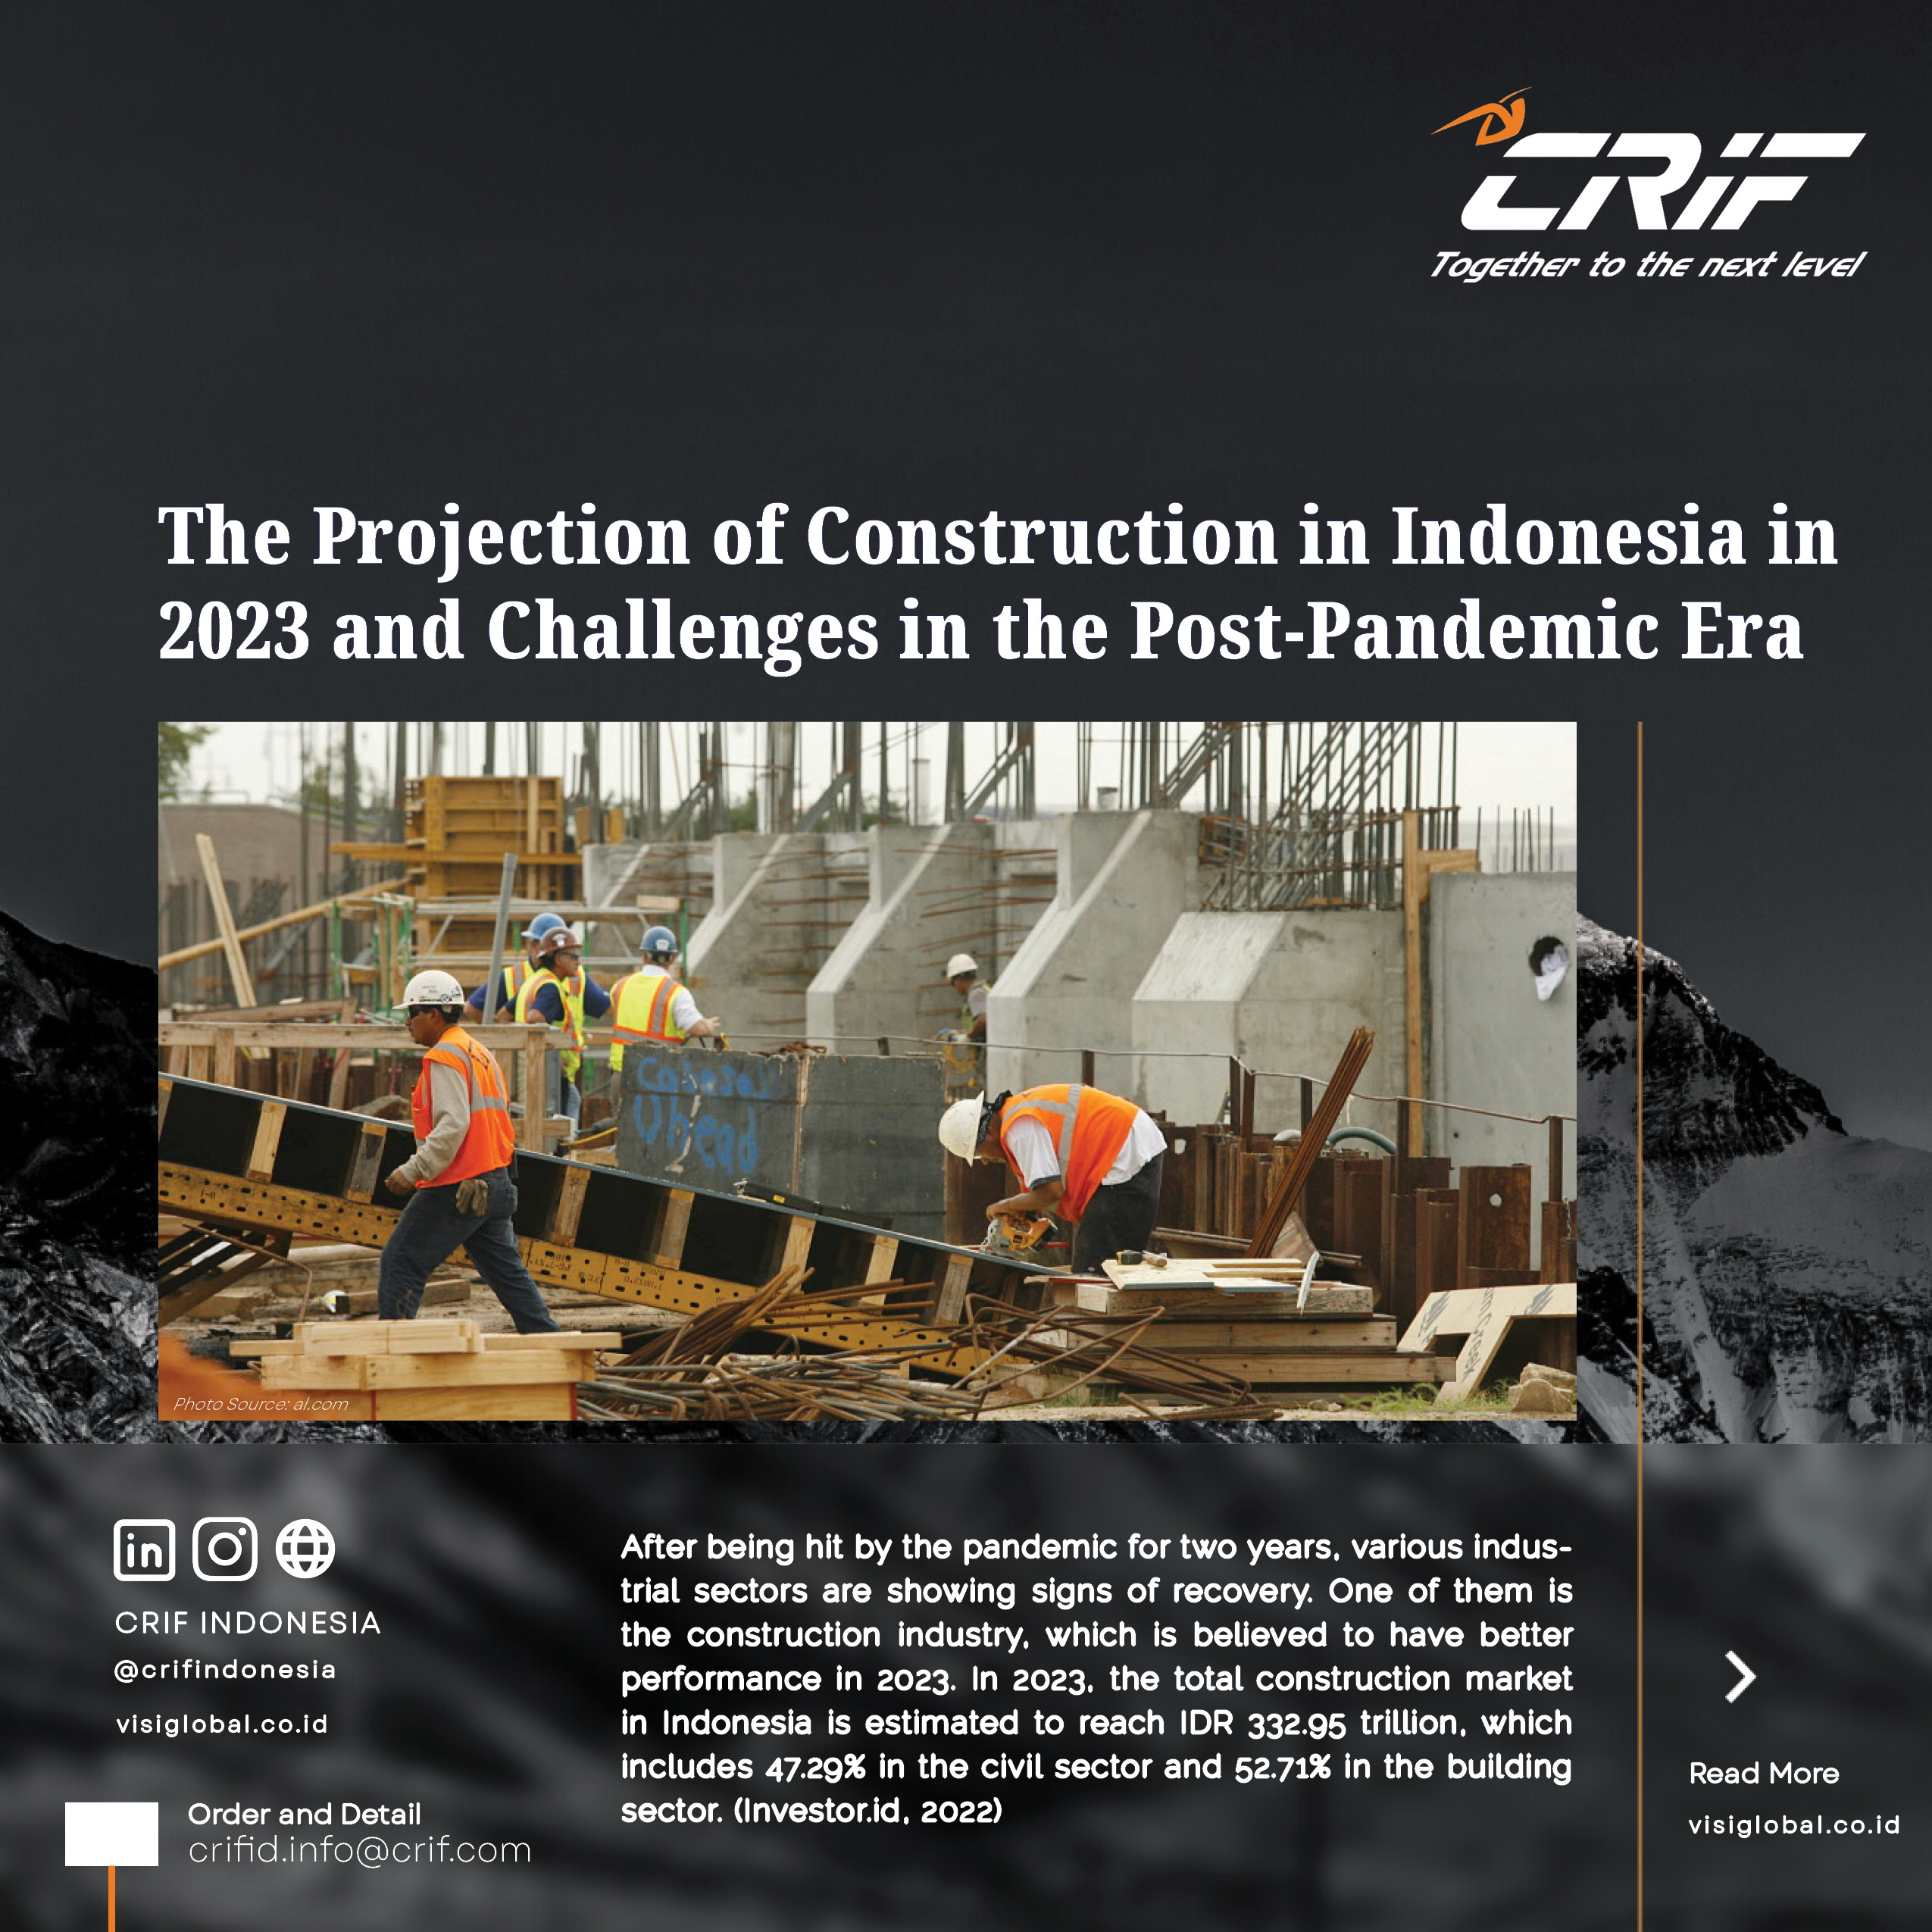 The Projection of Construction in Indonesia in 2023 and Challenges in the Post-Pandemic Era